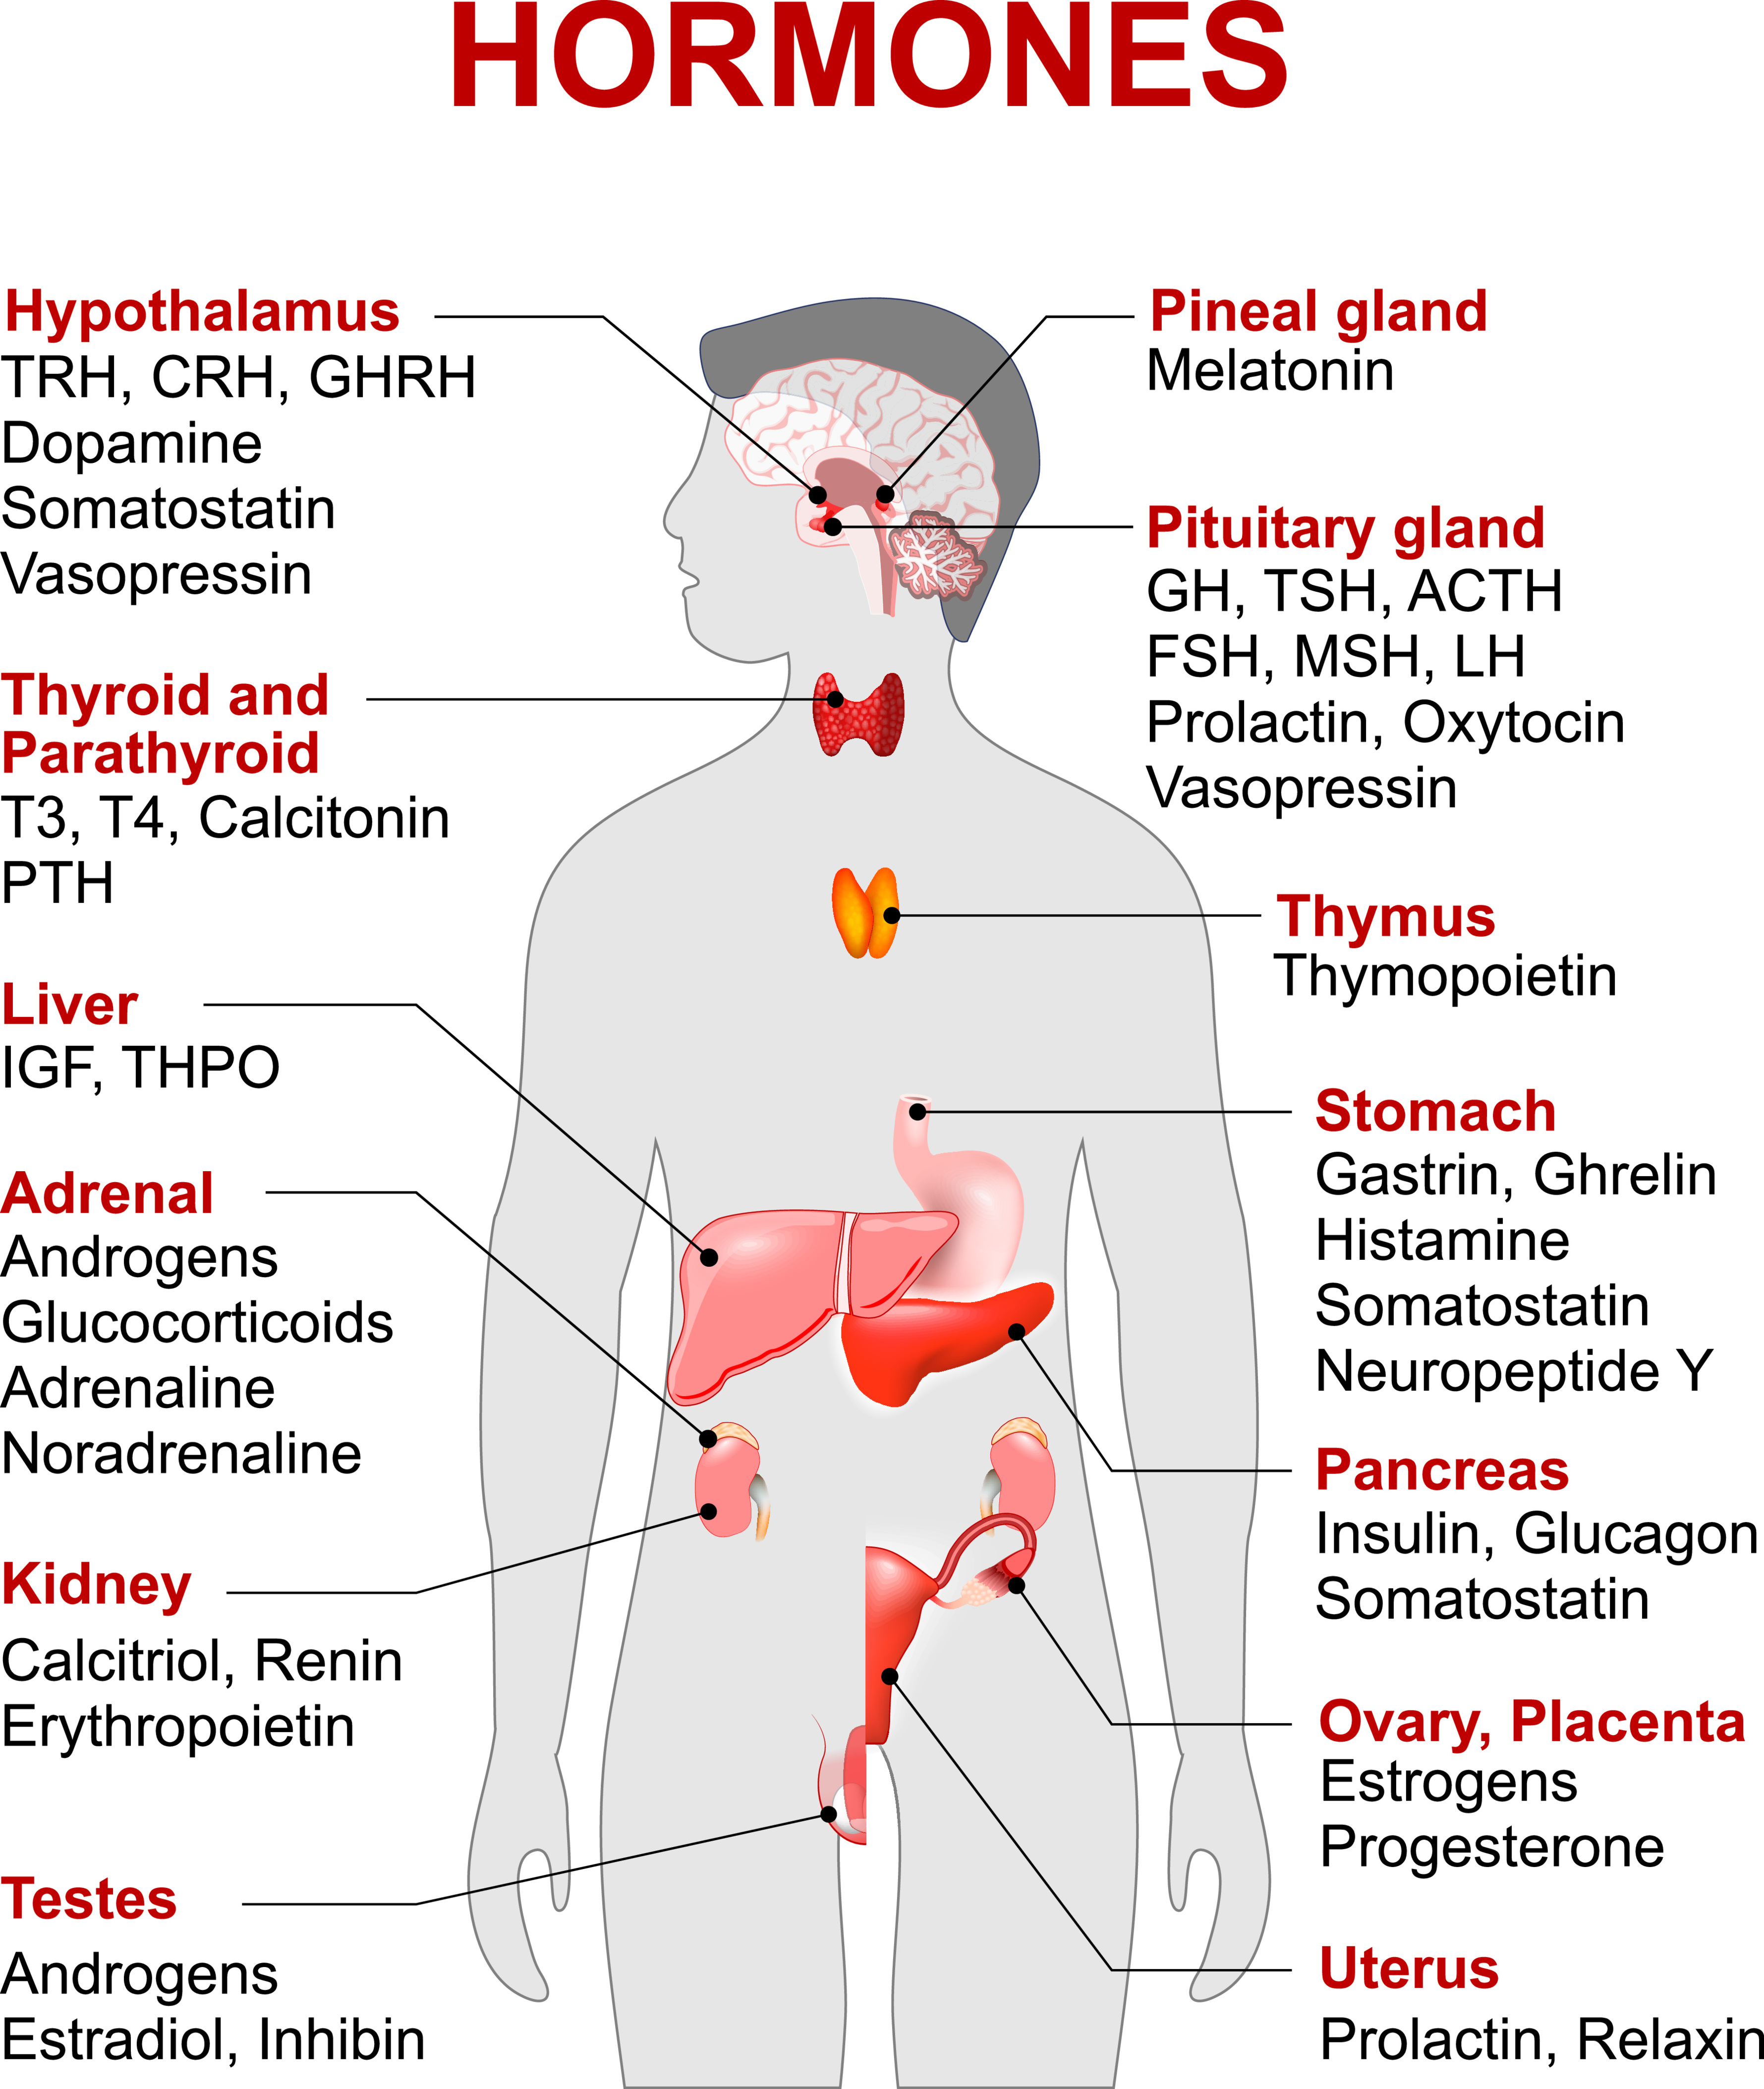 what hormone do the adrenal glands produce